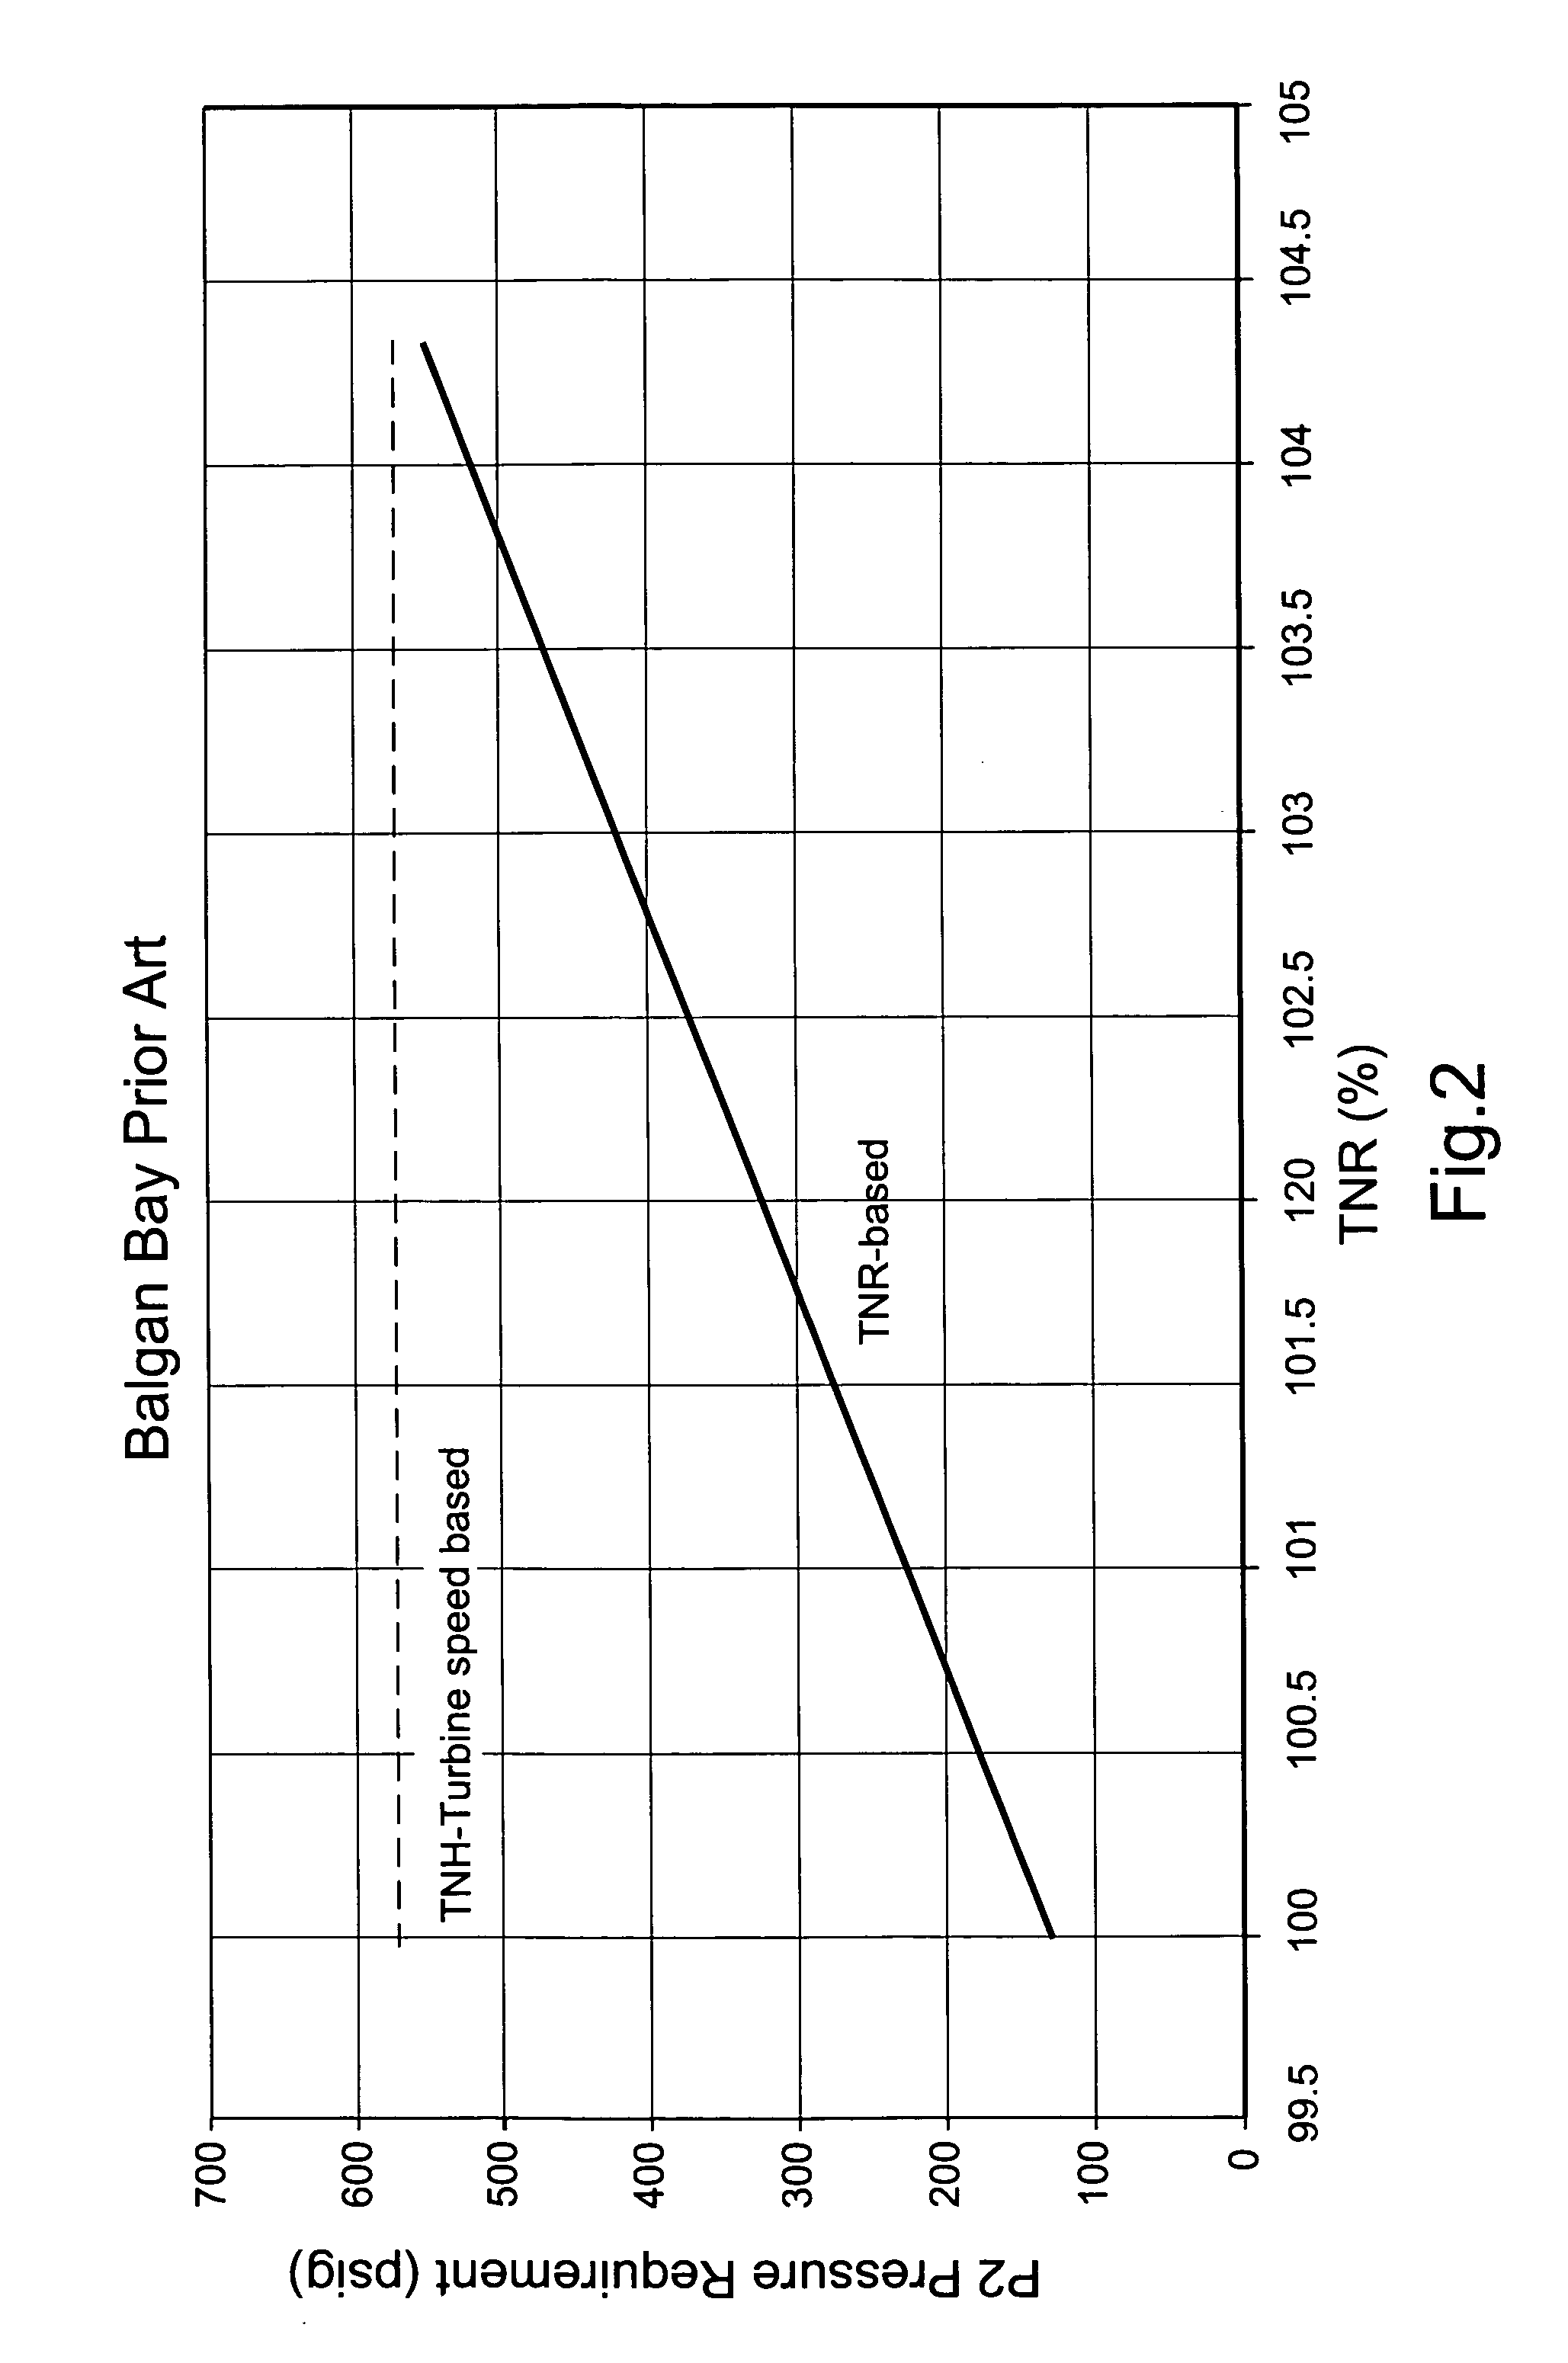 Pressure control method and system to reduce gas turbine fuel supply pressure requirements